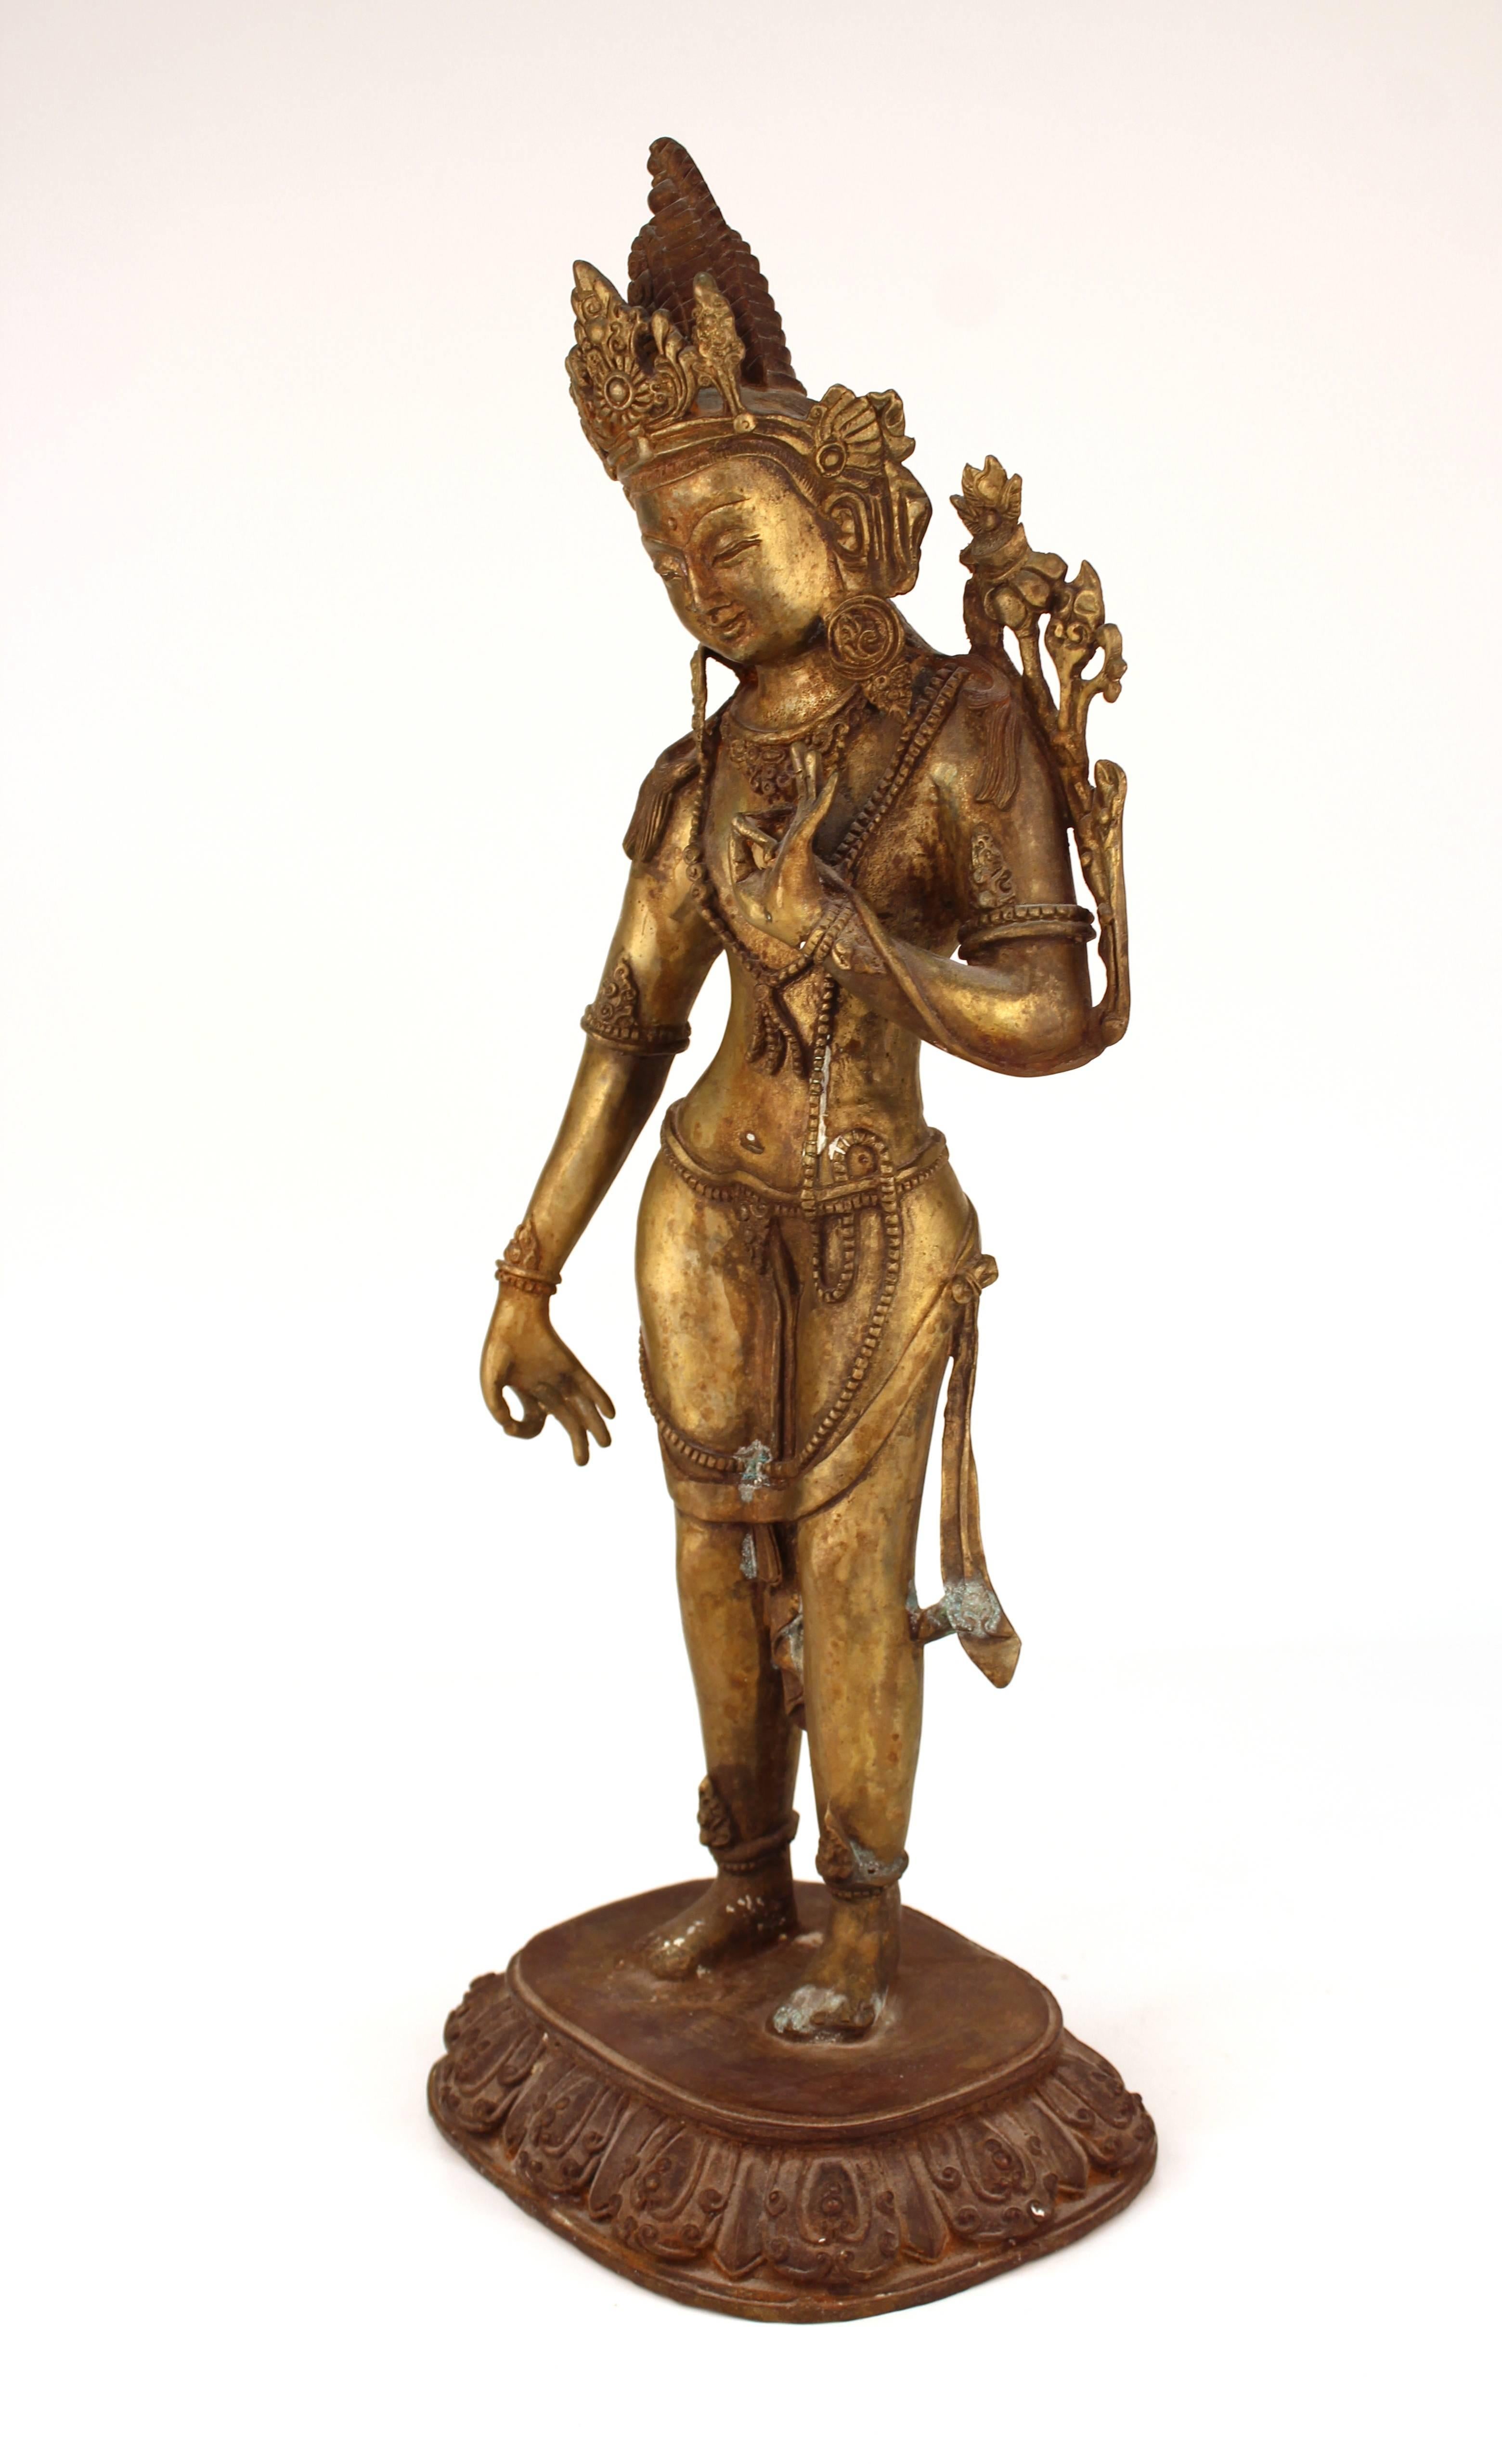 Tibetan or Indian Hindu gilt brass figure of a standing Bhumi Devi on a throne, her proper left hand holding Utmala, the night lotus, her right hand in abhaya mudra. The piece has some areas of green encrustation to the patina.